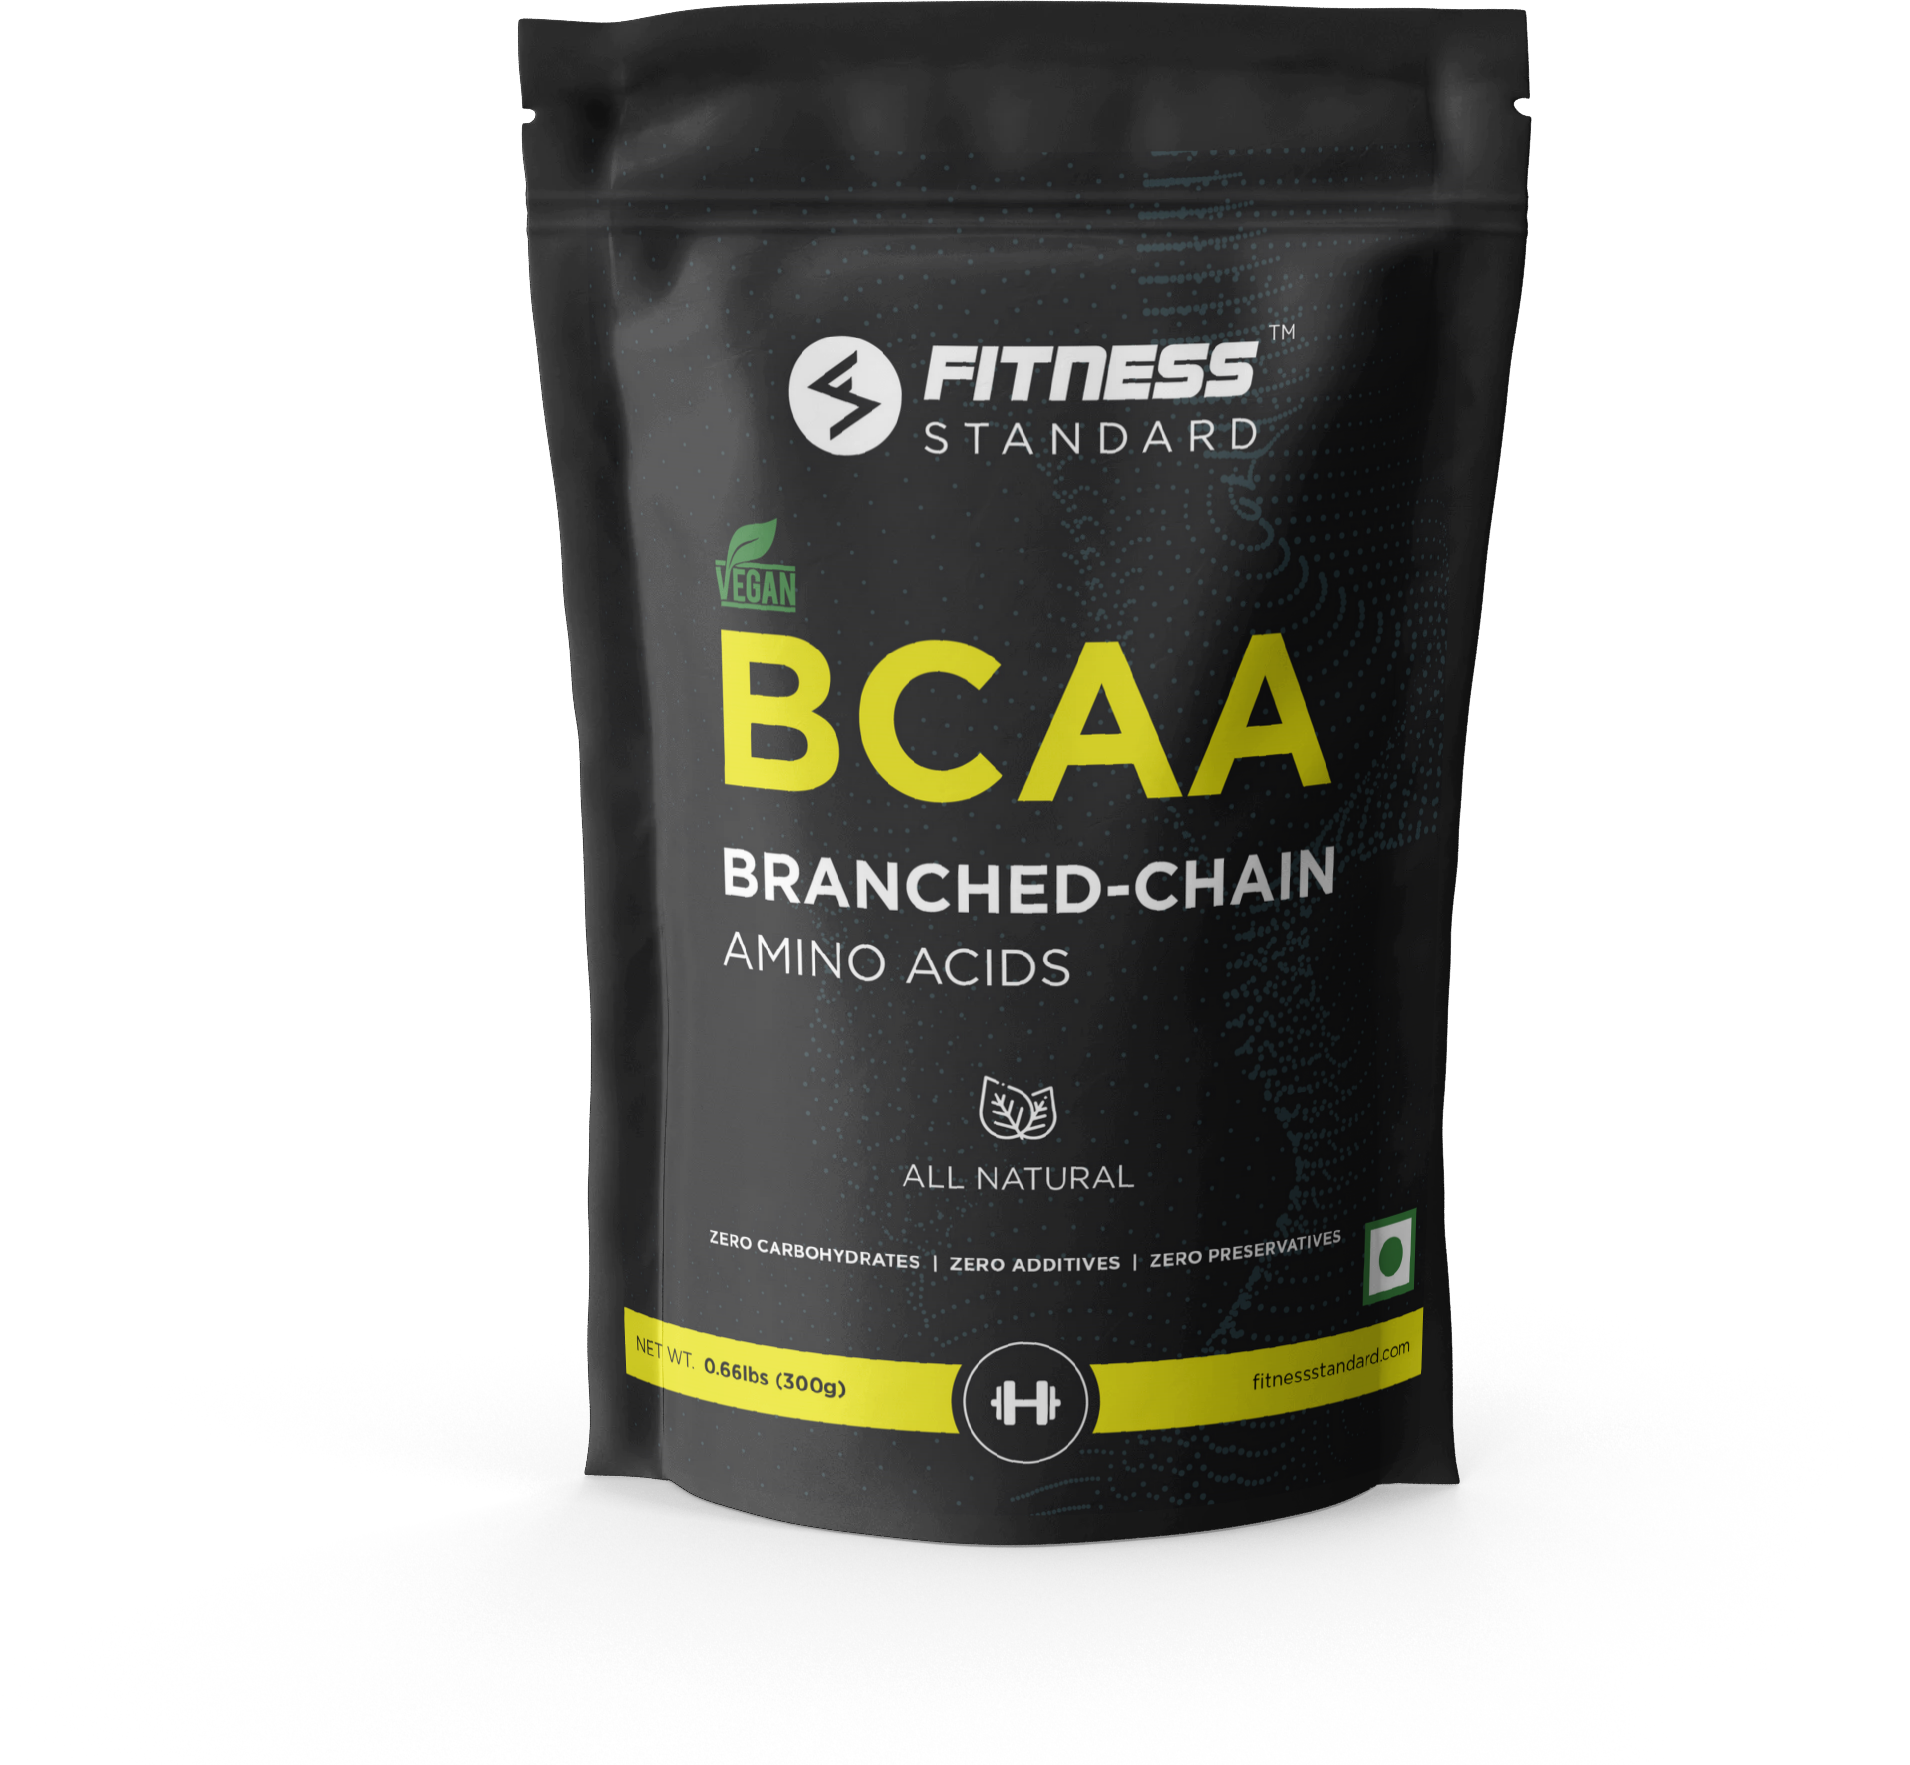 Copy of Branched-Chain Amino Acids